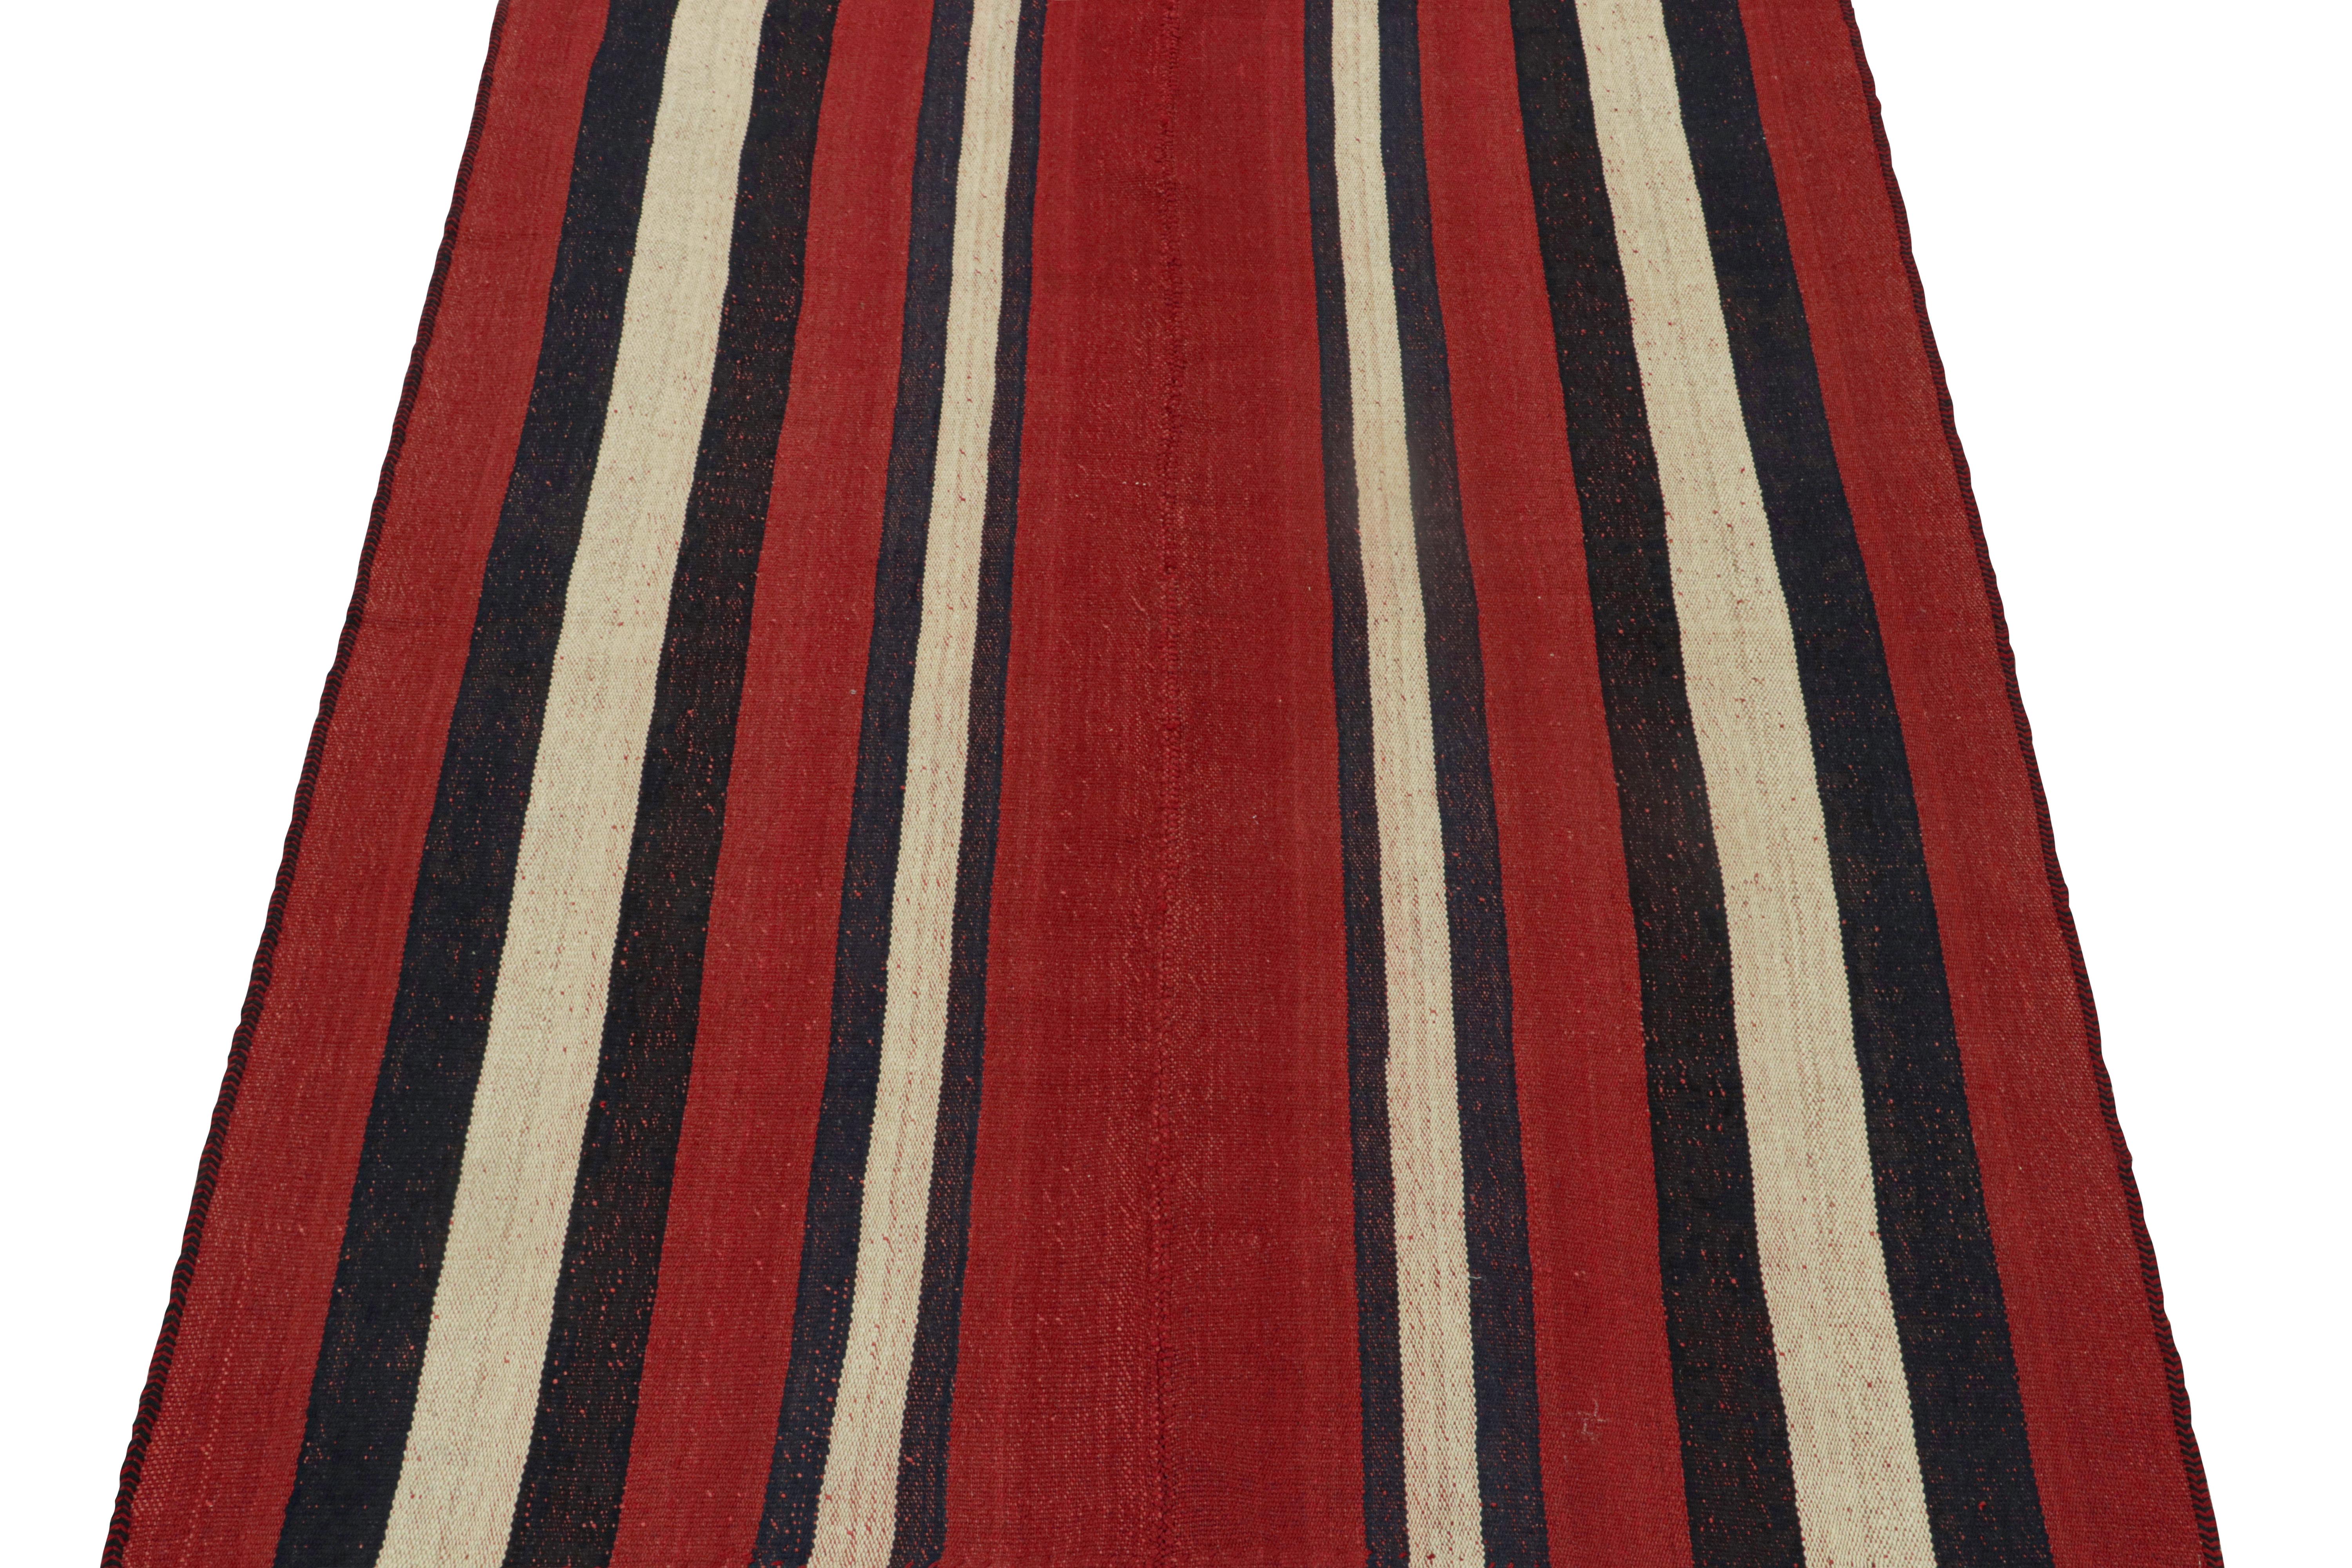 This vintage 5x7 Persian Kilim is a mid-century tribal rug, handwoven in wool circa 1950-1960. 

Its design most likely represents a Jajim-style Kilim–a flat-weaving technique in which multiple pieces are combined into one. This creates the look